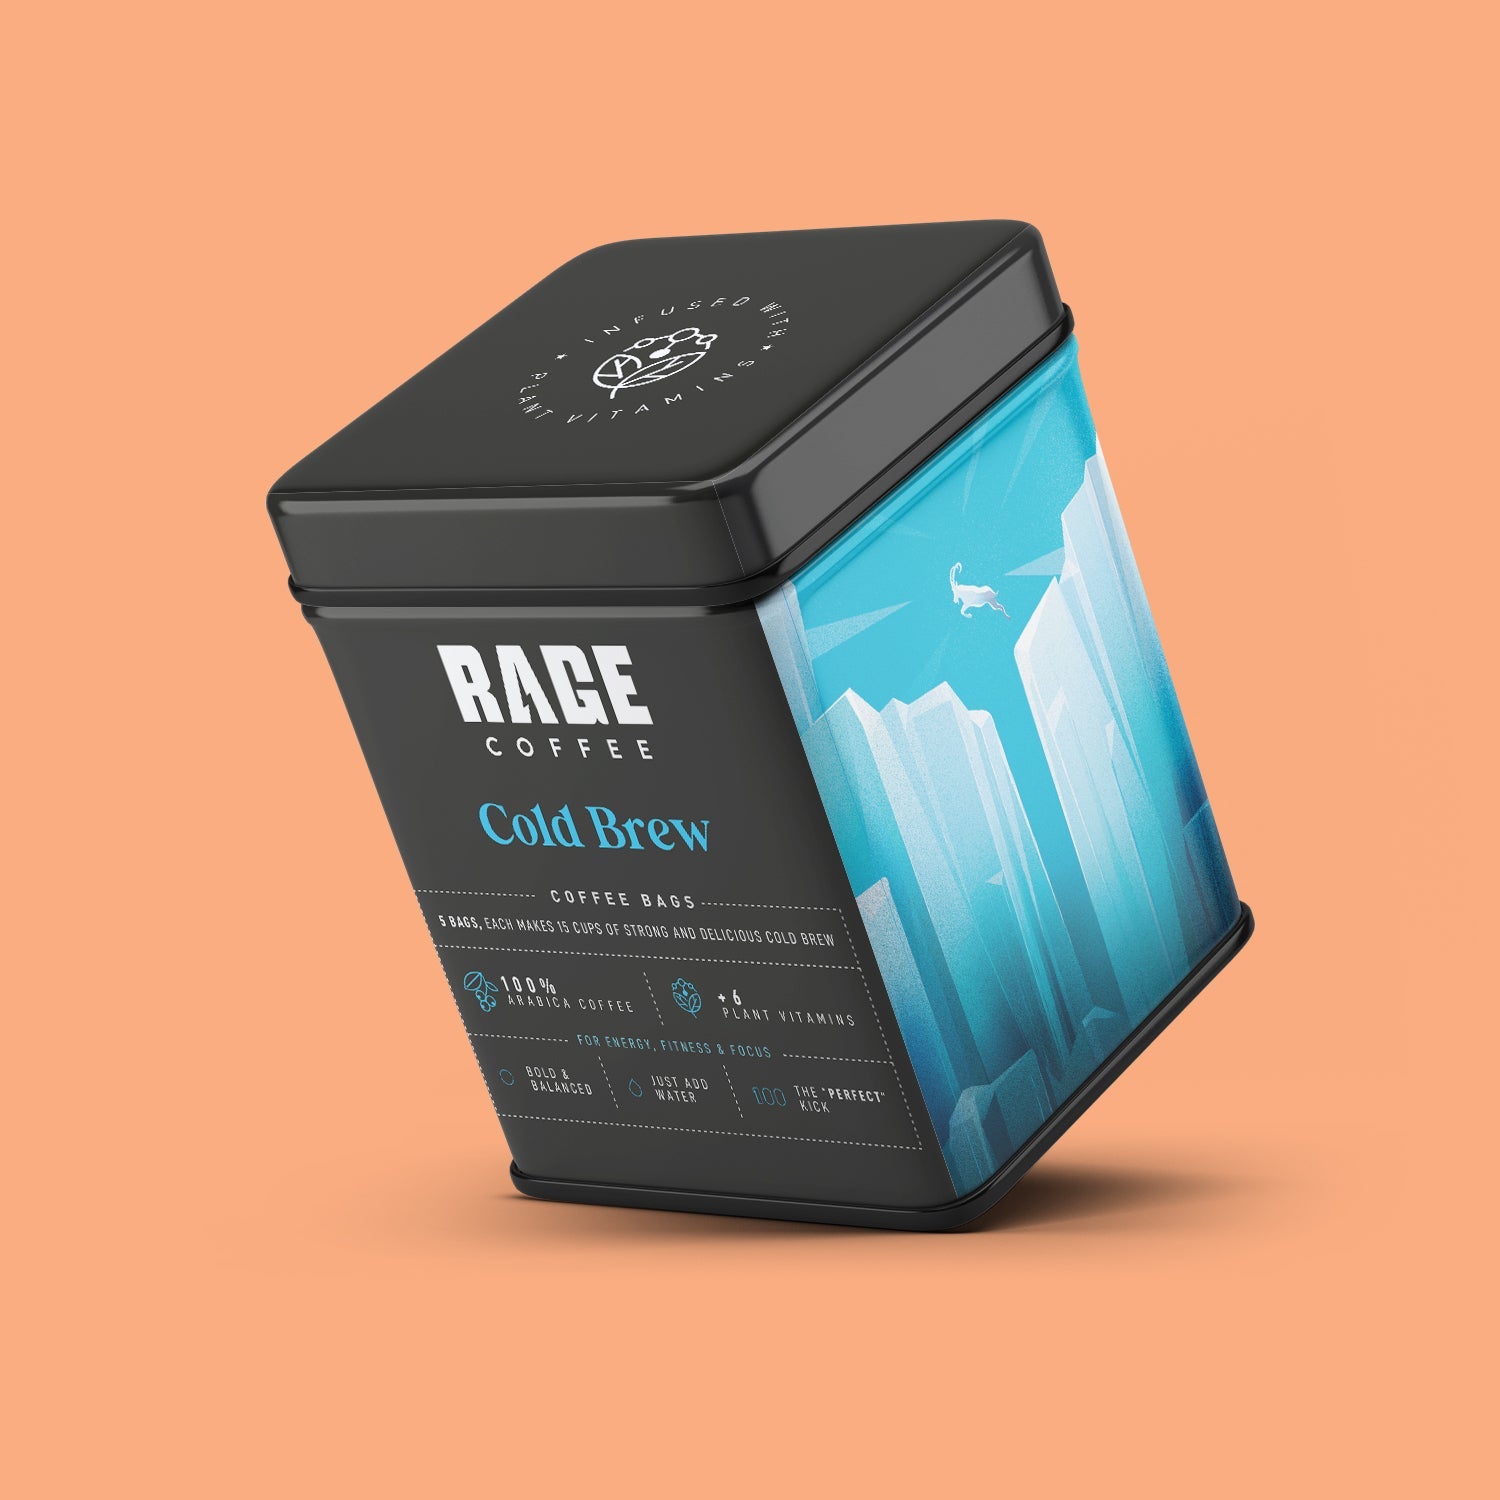 Cold Brew Bags - Rage Coffee